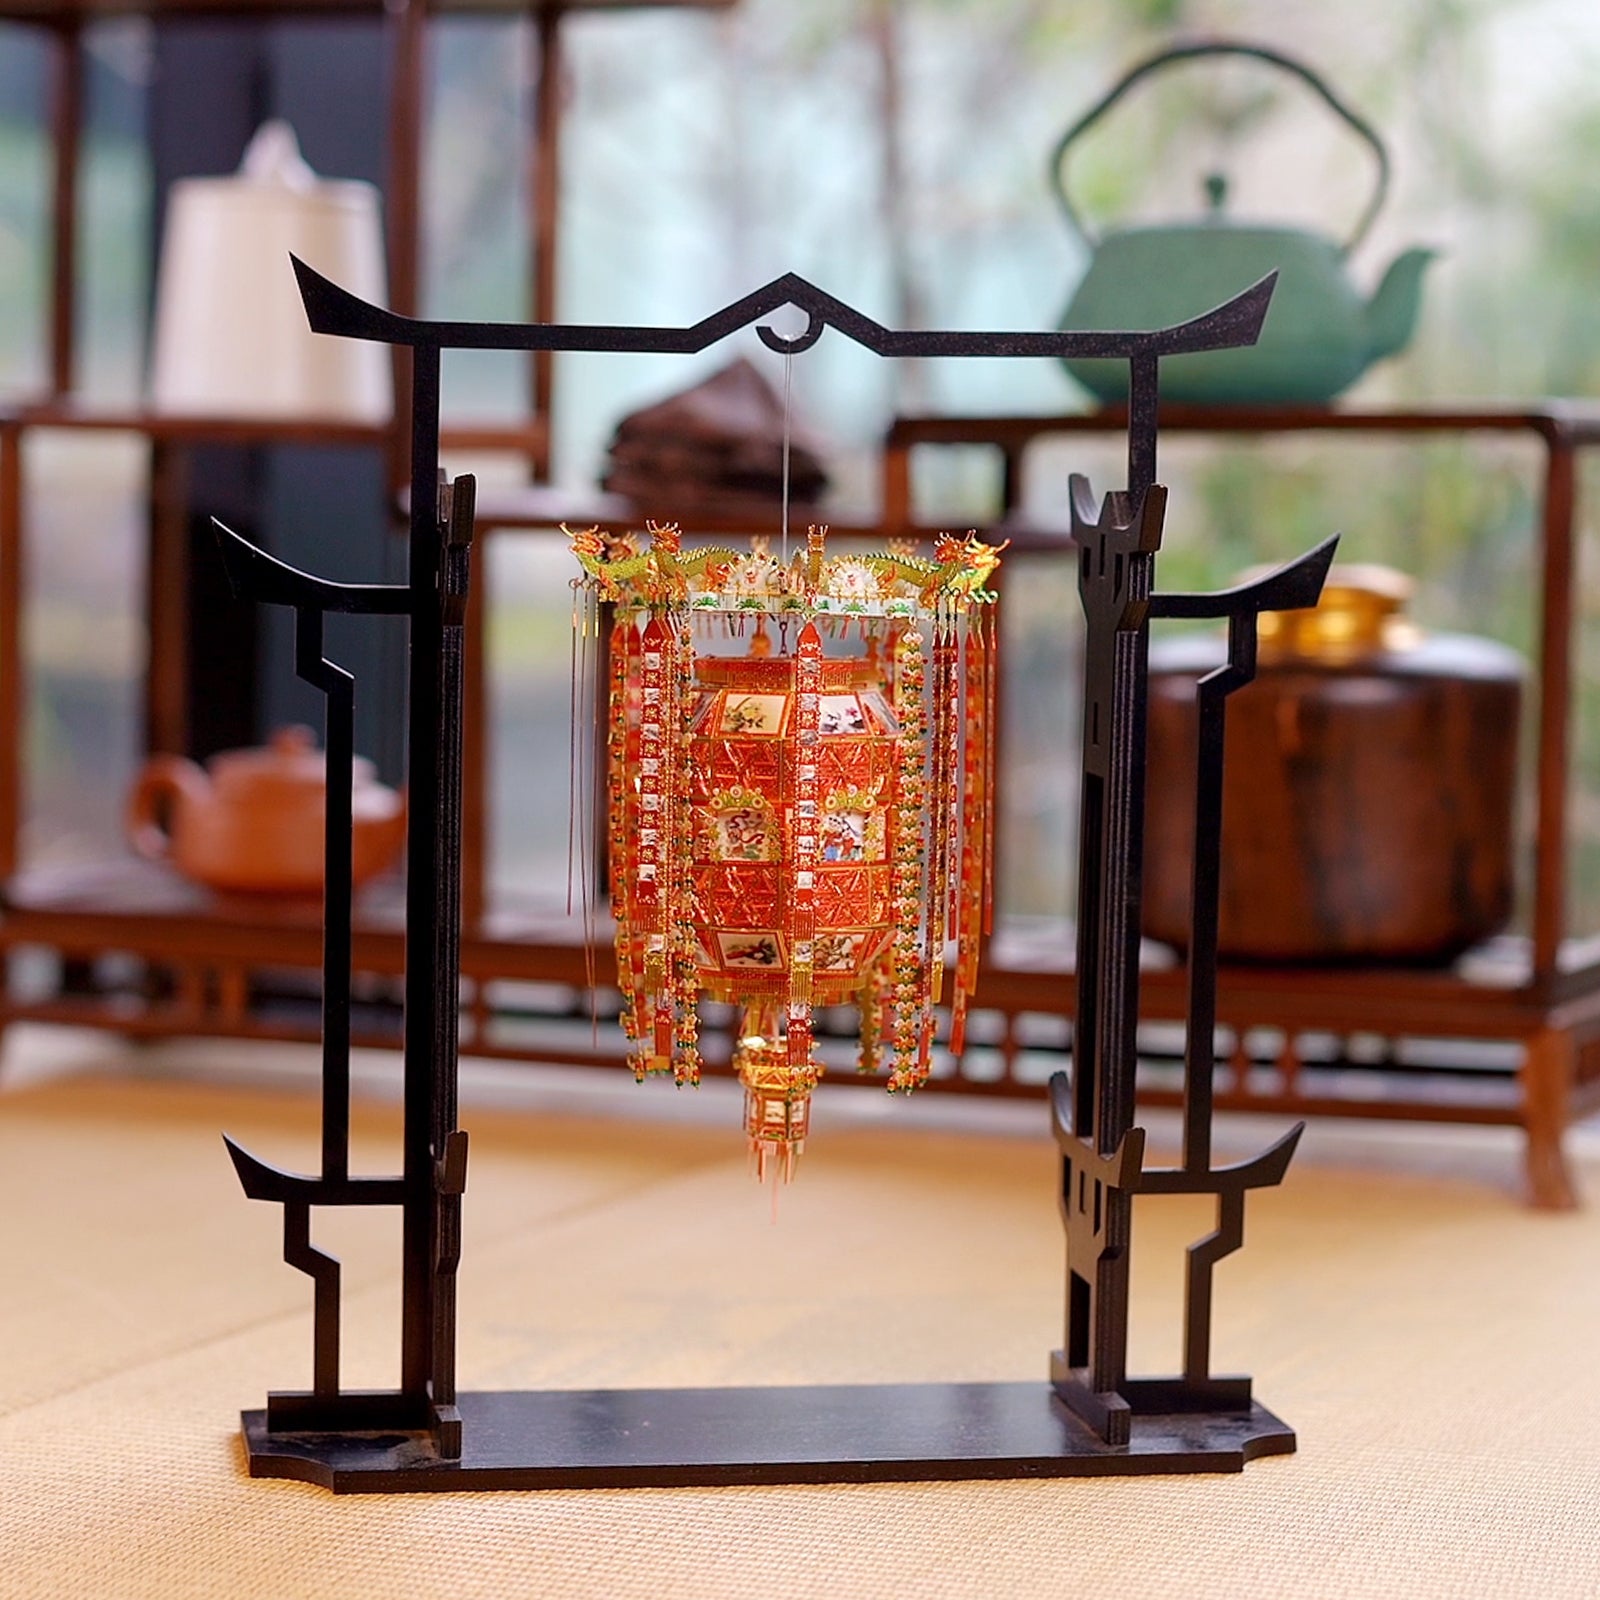 Piececool Puzzle DIY 3D One Thousand Angle Lantern Puzzle